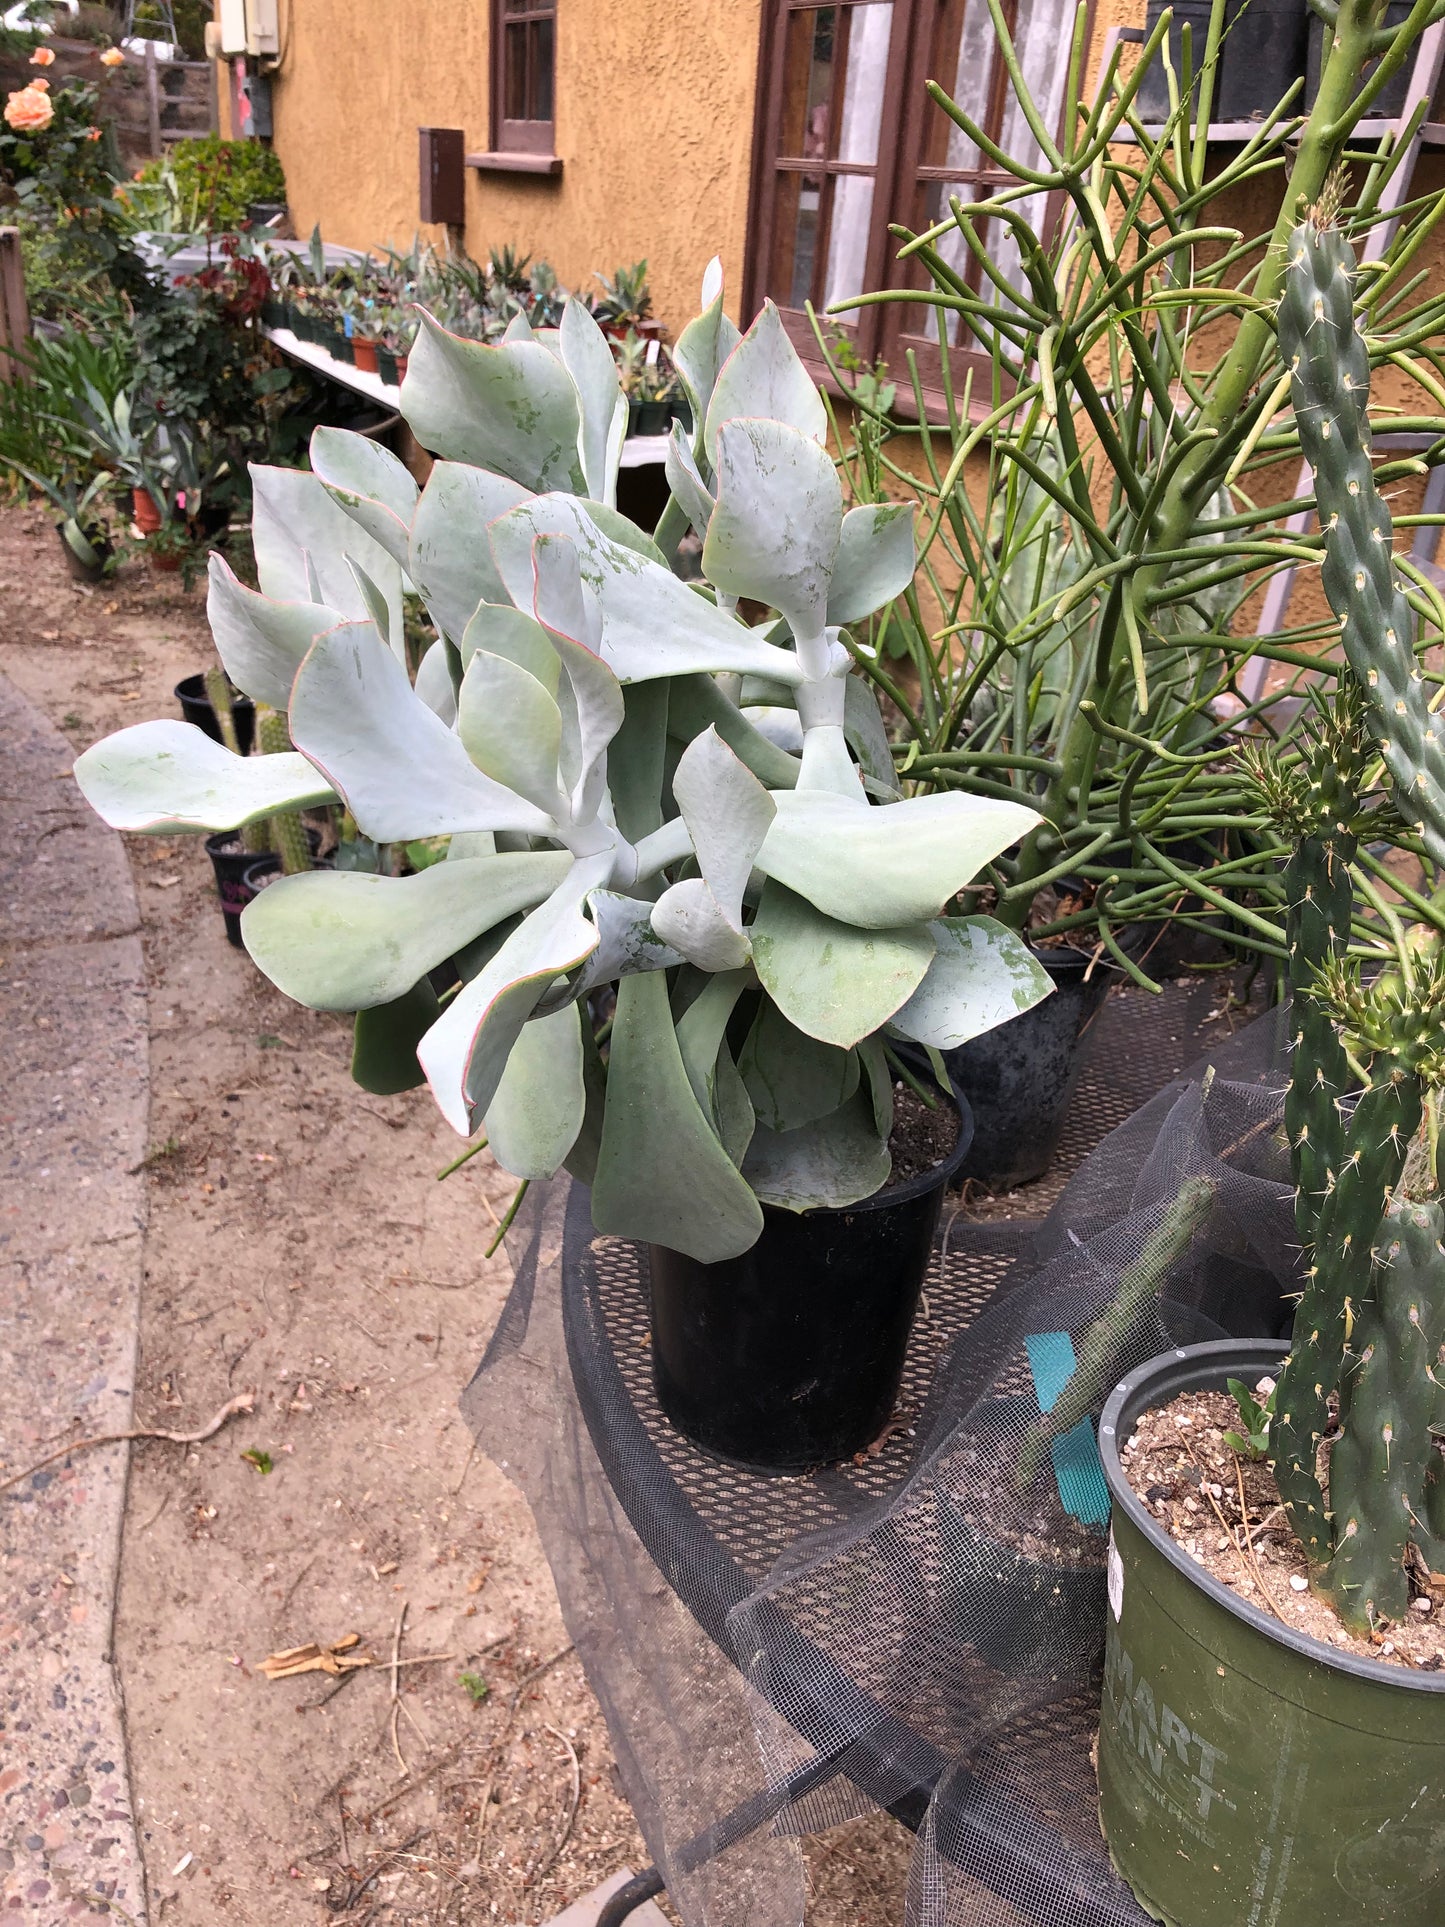 Cotyledon Silver Waves Extra Large Specimen 30"Tall #163P